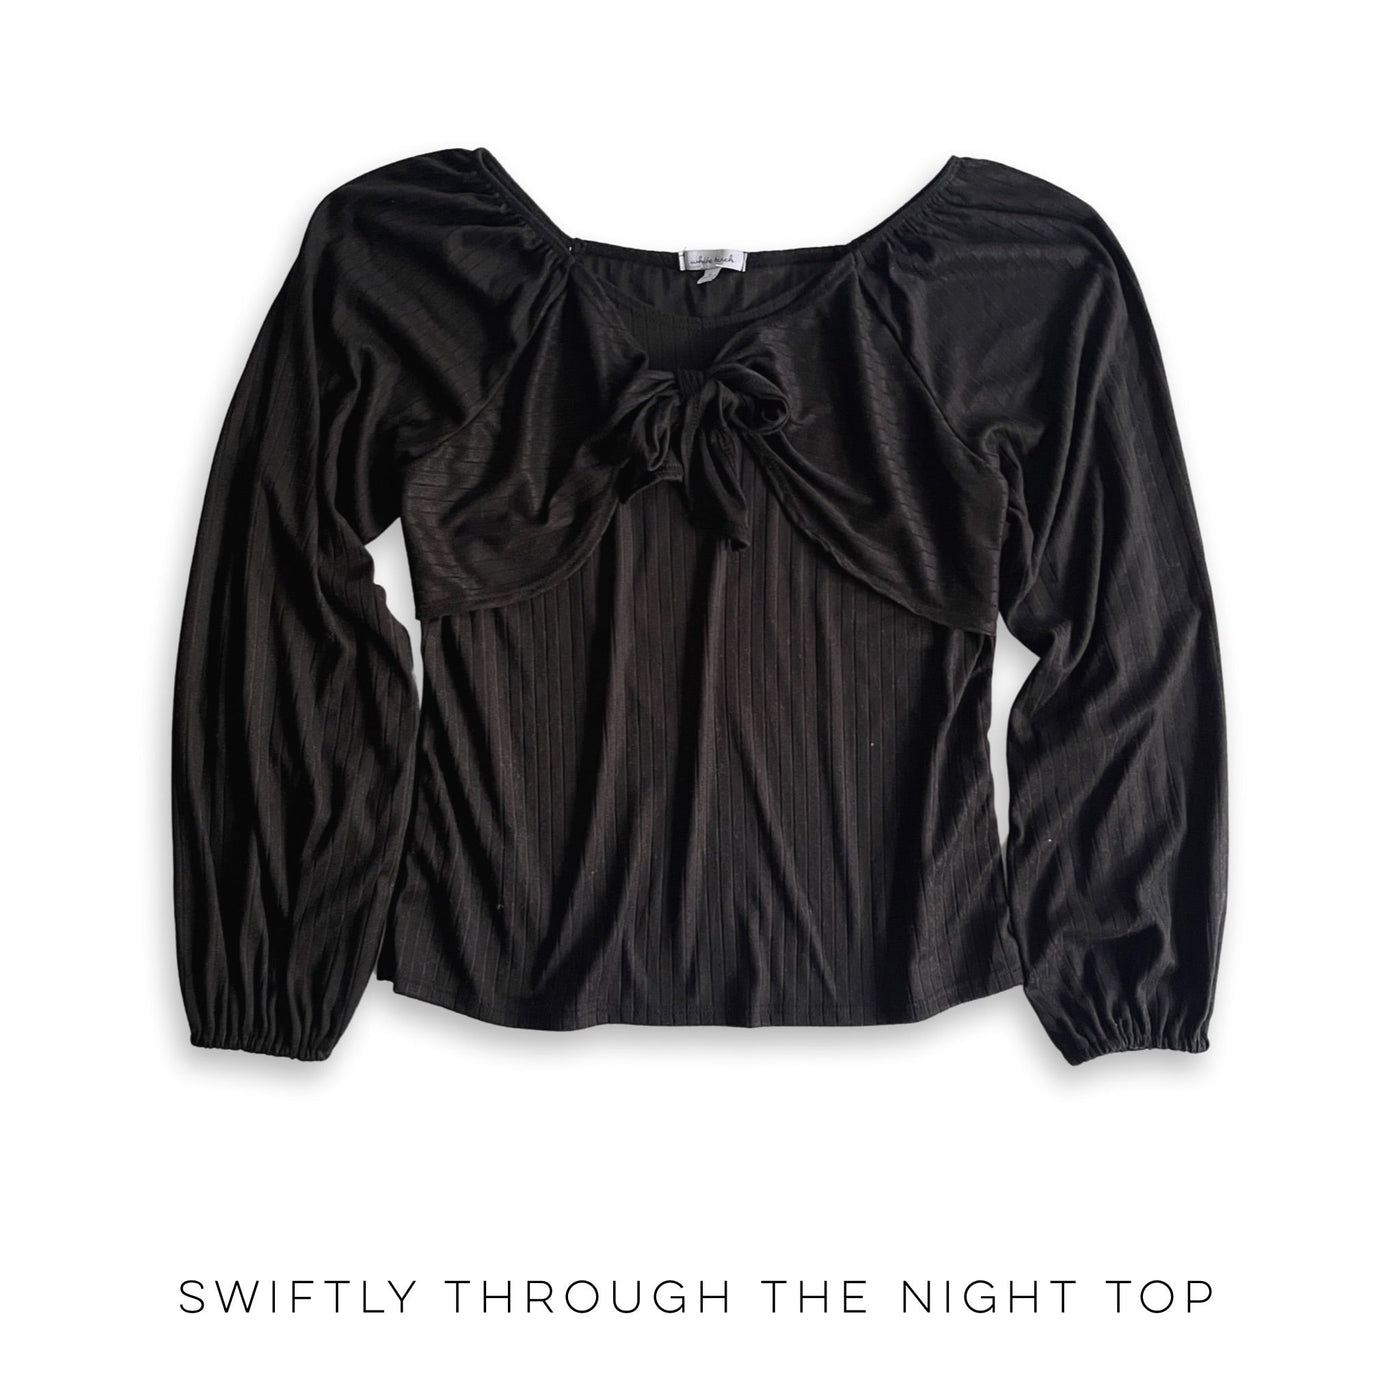 Swiftly Through the Night Top - Copper + Rose